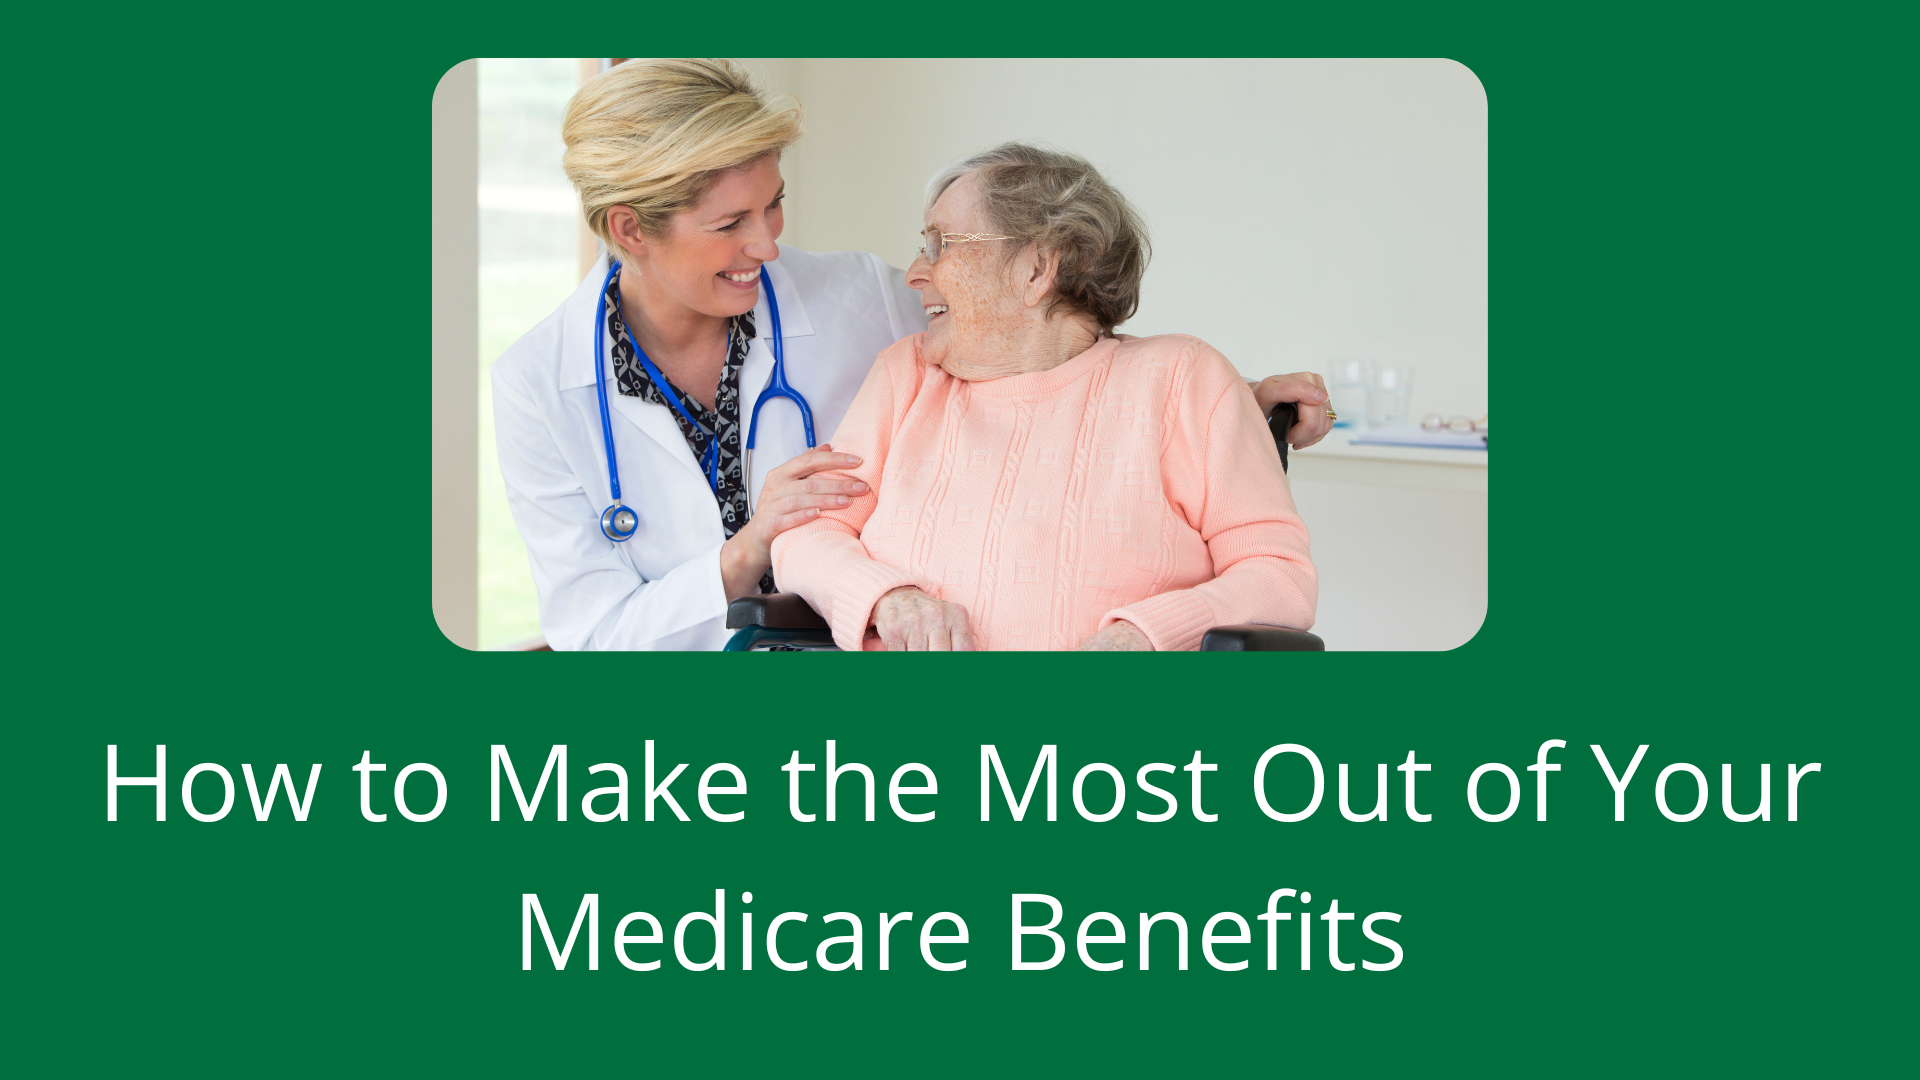 Make the most out of your Medicare benefits